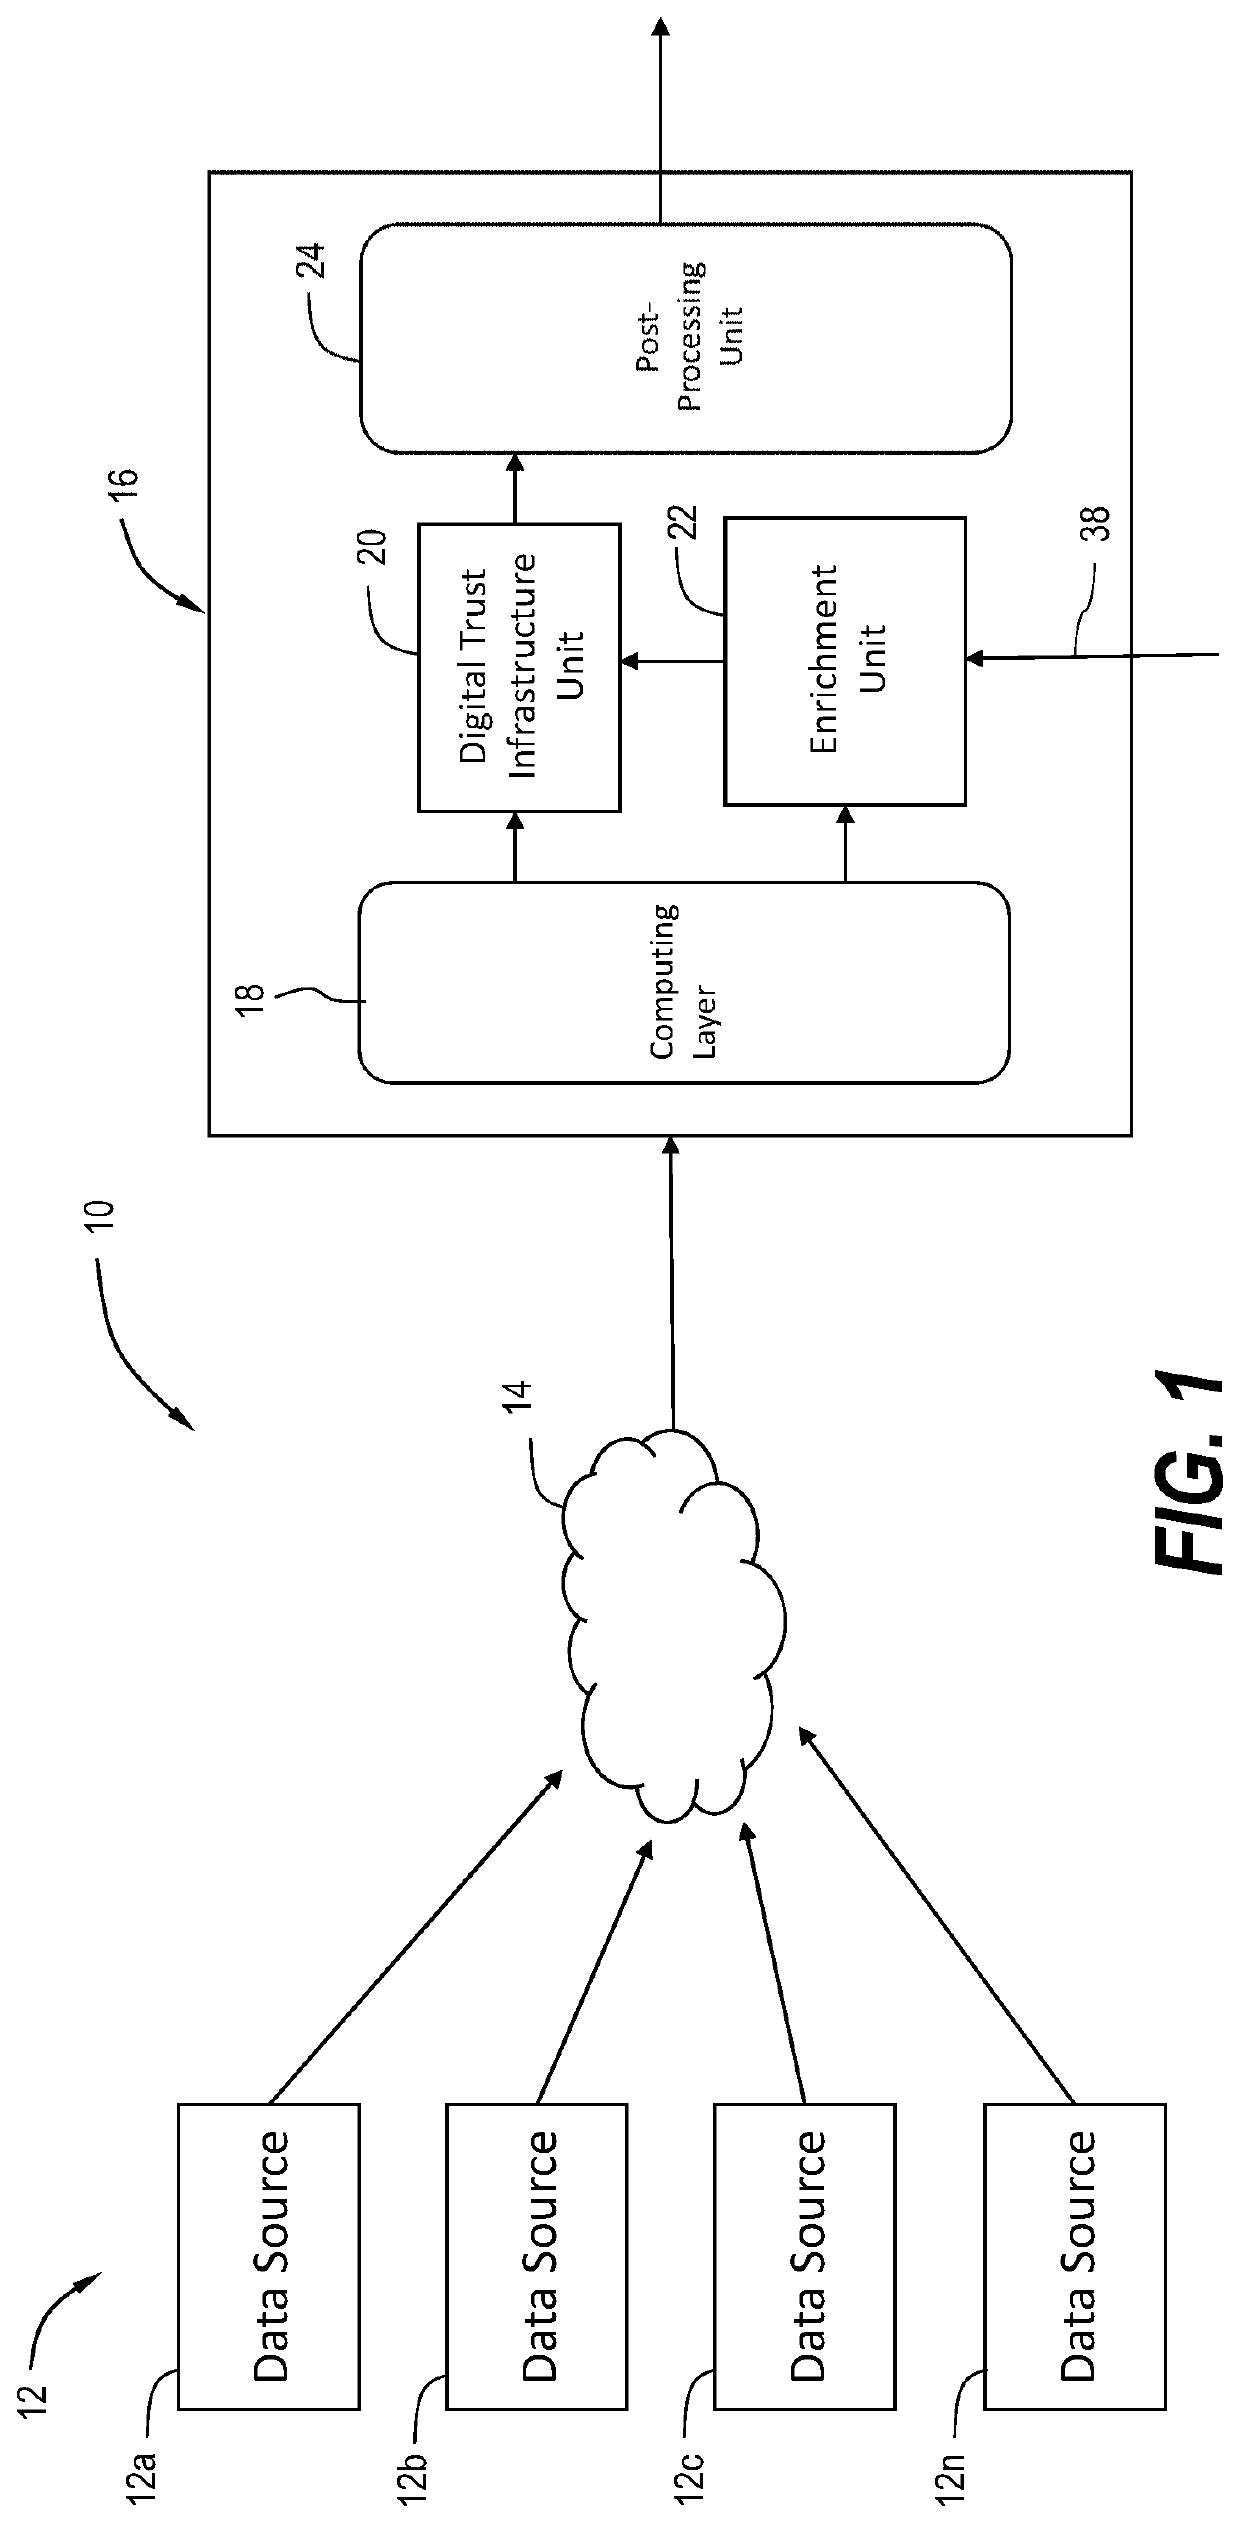 System and method for collecting and storing environmental data in a digital trust model and for determining emissions data therefrom